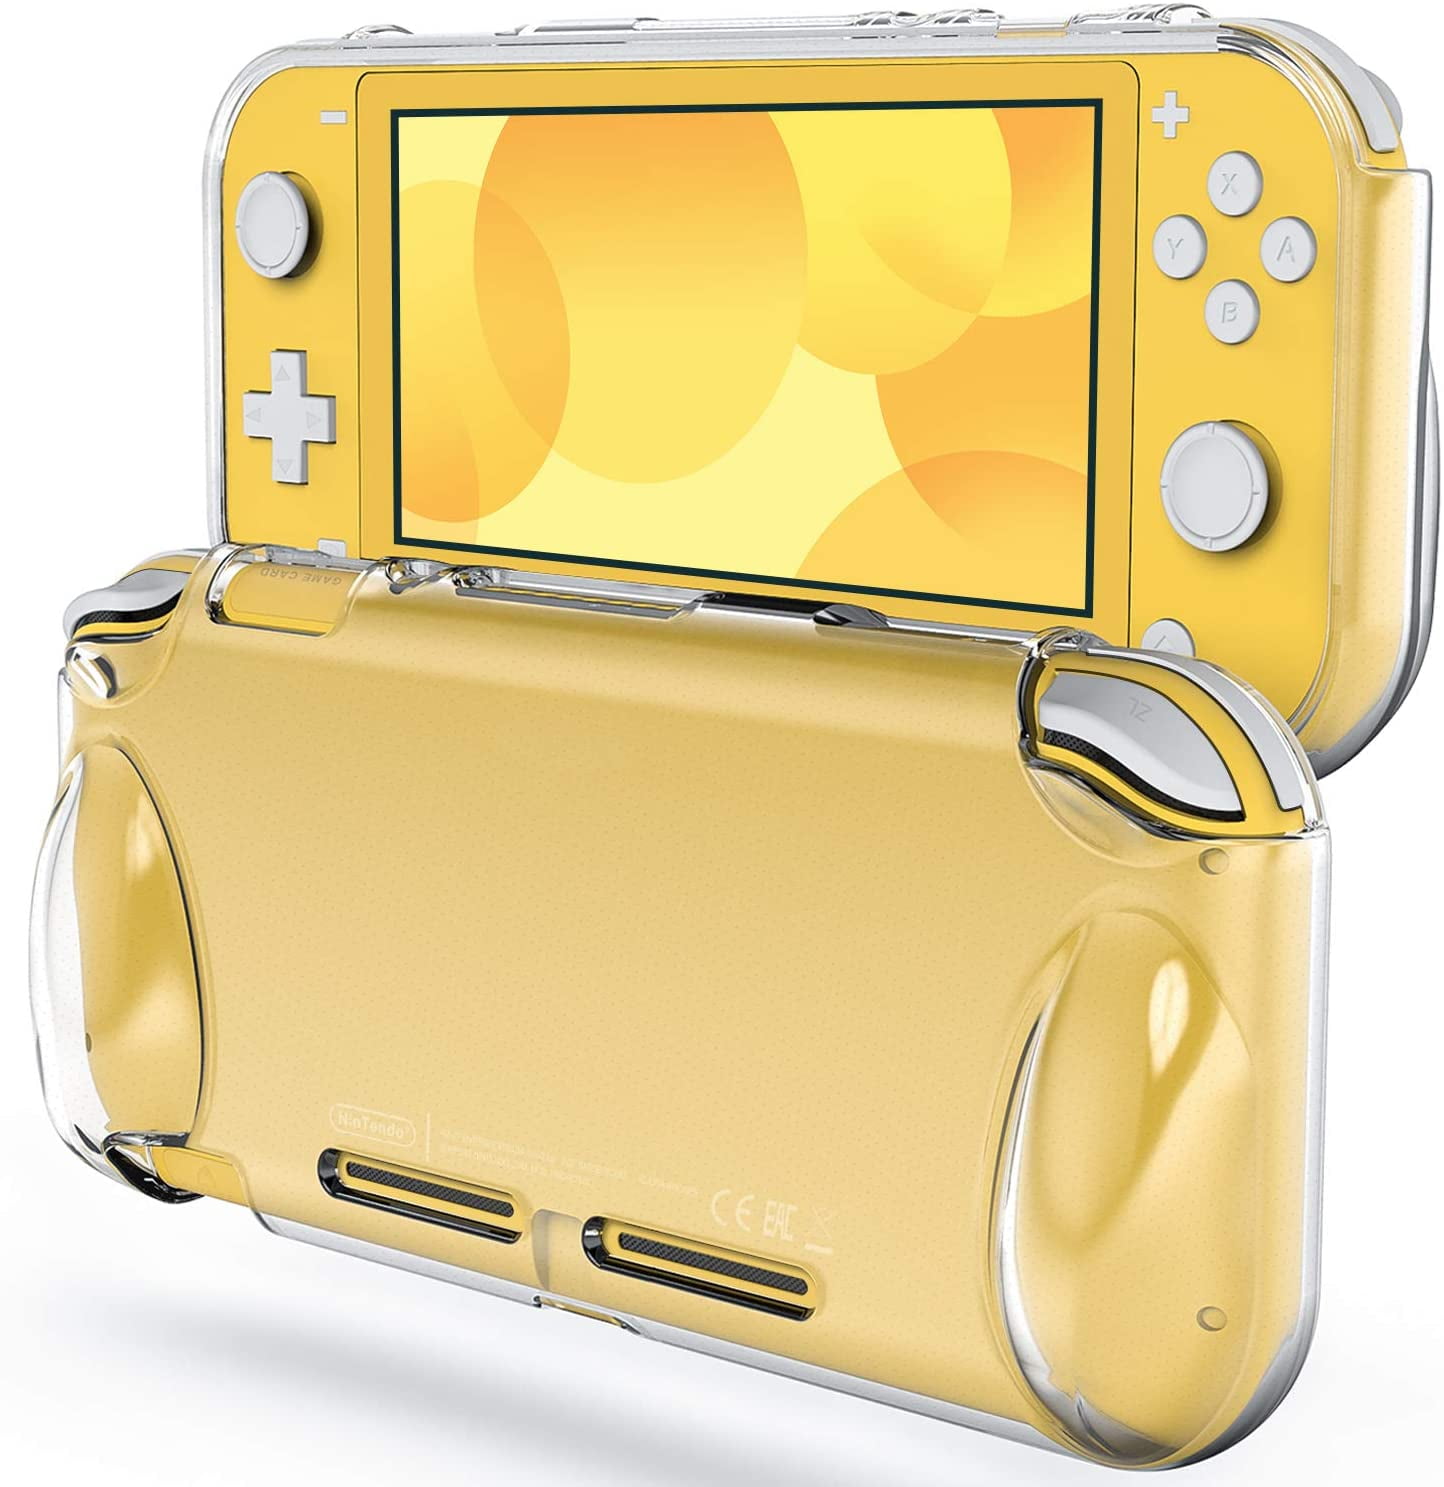 JETech Case for Nintendo Switch Lite 2019, Grip Cover Shock-Absorption and Design, HD - Walmart.com